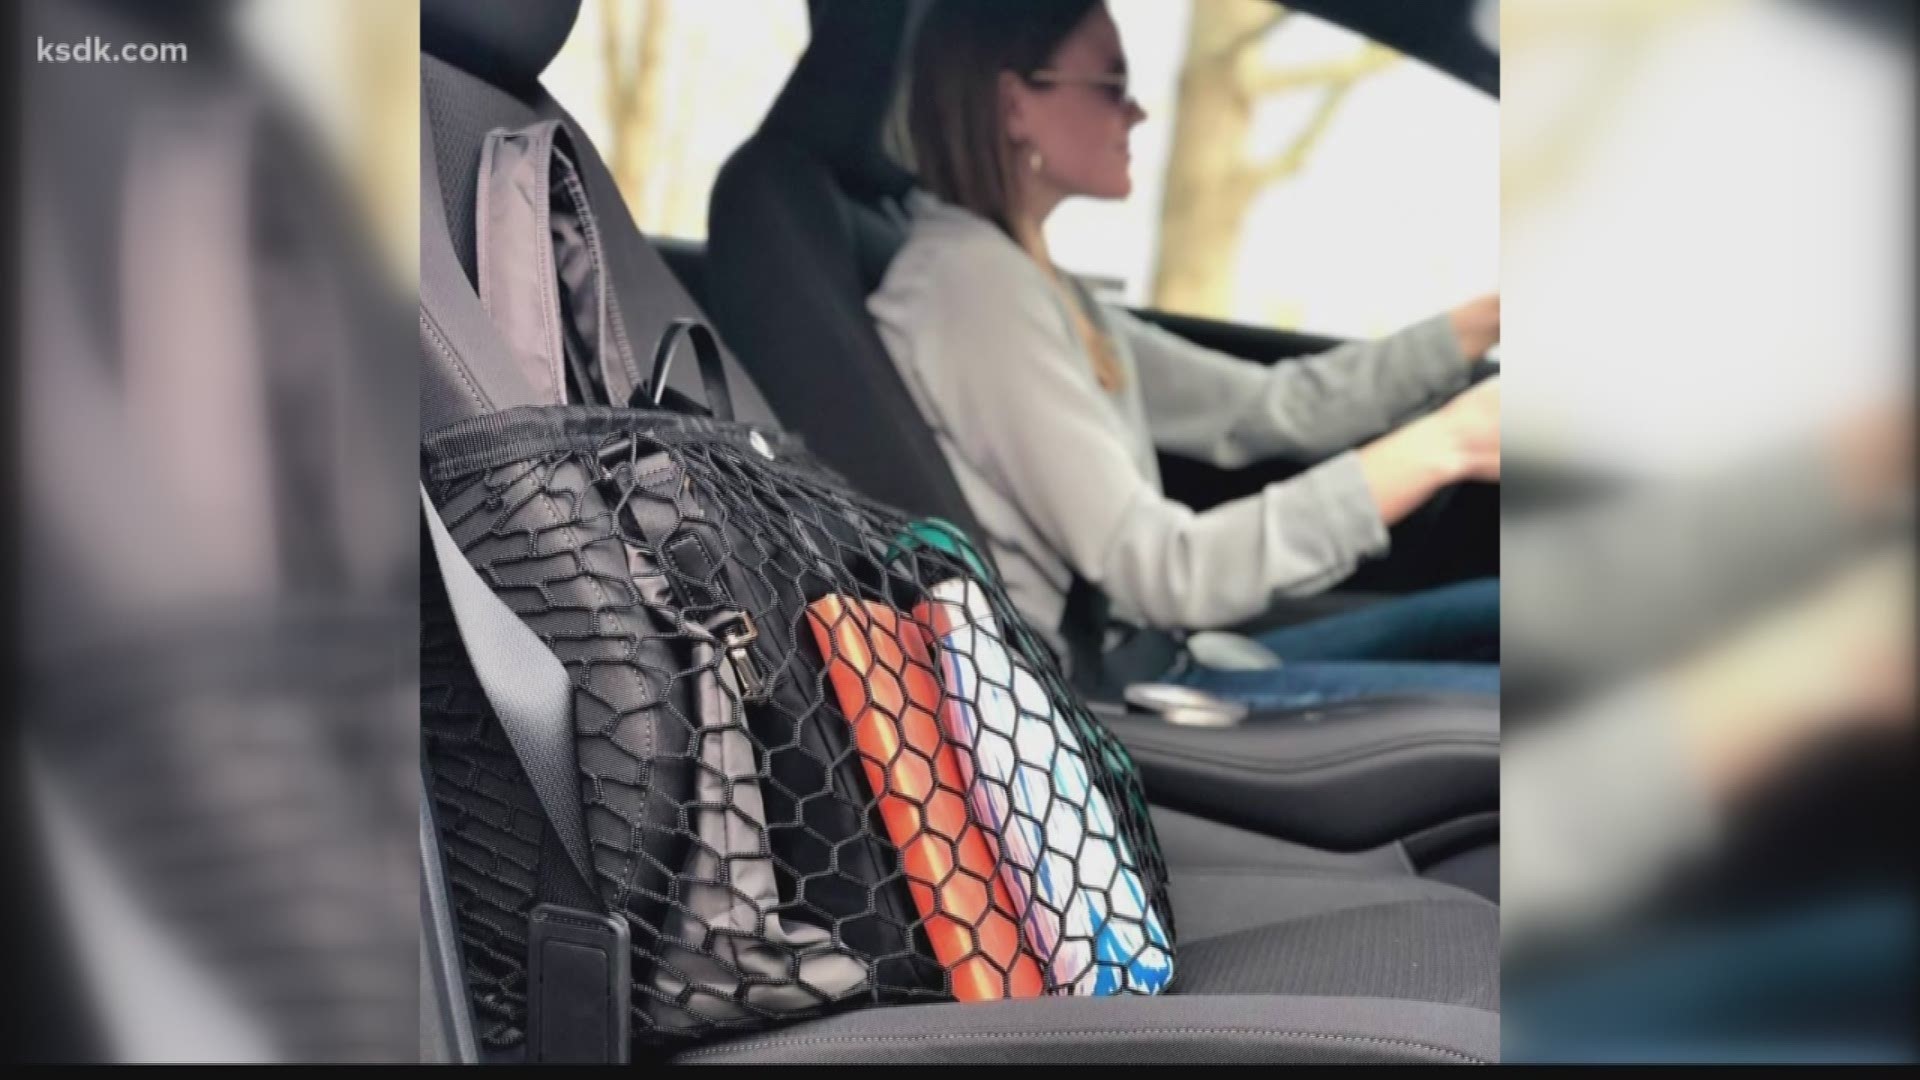 A local company invented a unique and practical product for anyone who drives a car.